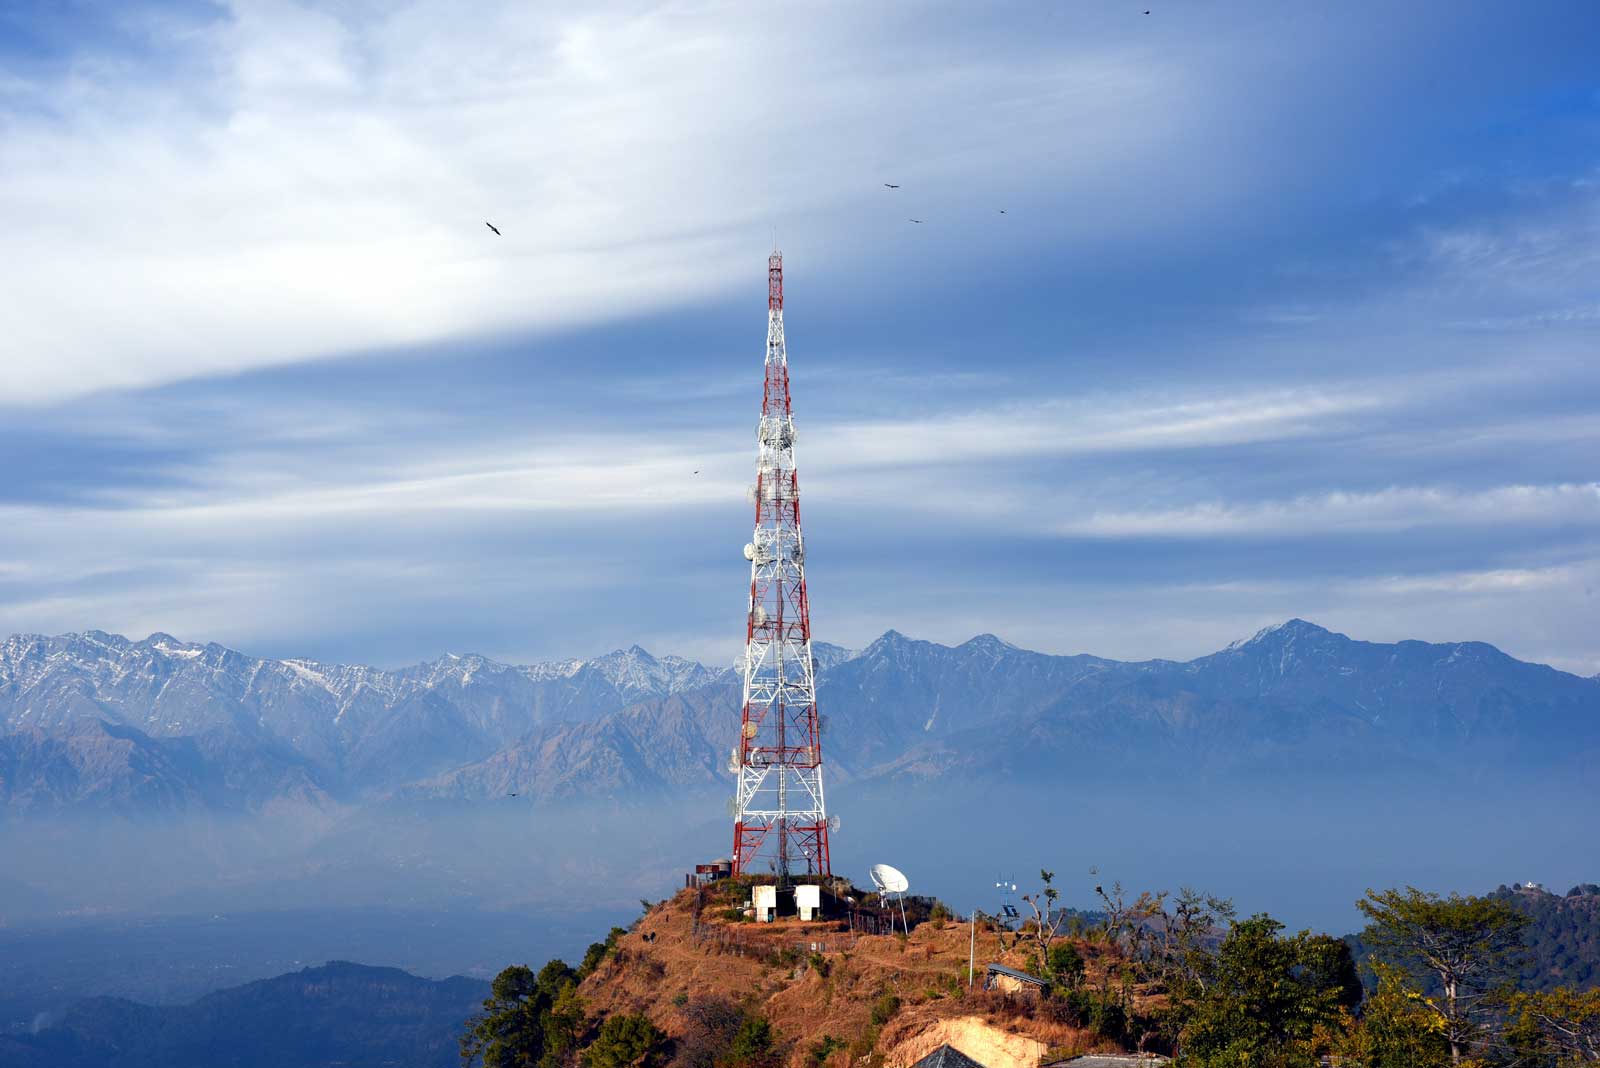 A radio tower surrounding by beautiful mountains